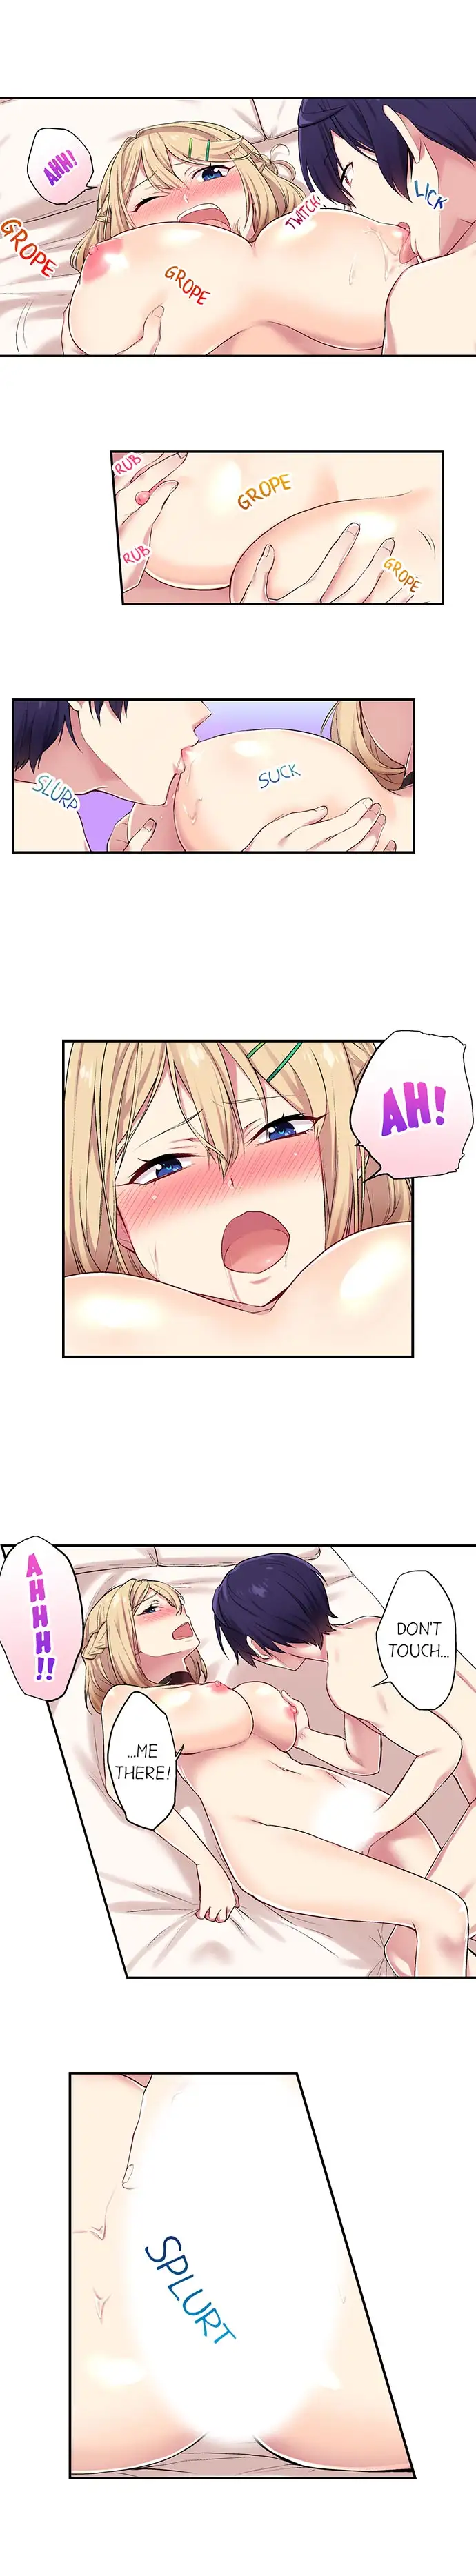 Committee Chairman, Didn’t You Just Masturbate In the Bathroom? I Can See the Number of Times People Orgasm - Chapter 4 Page 3